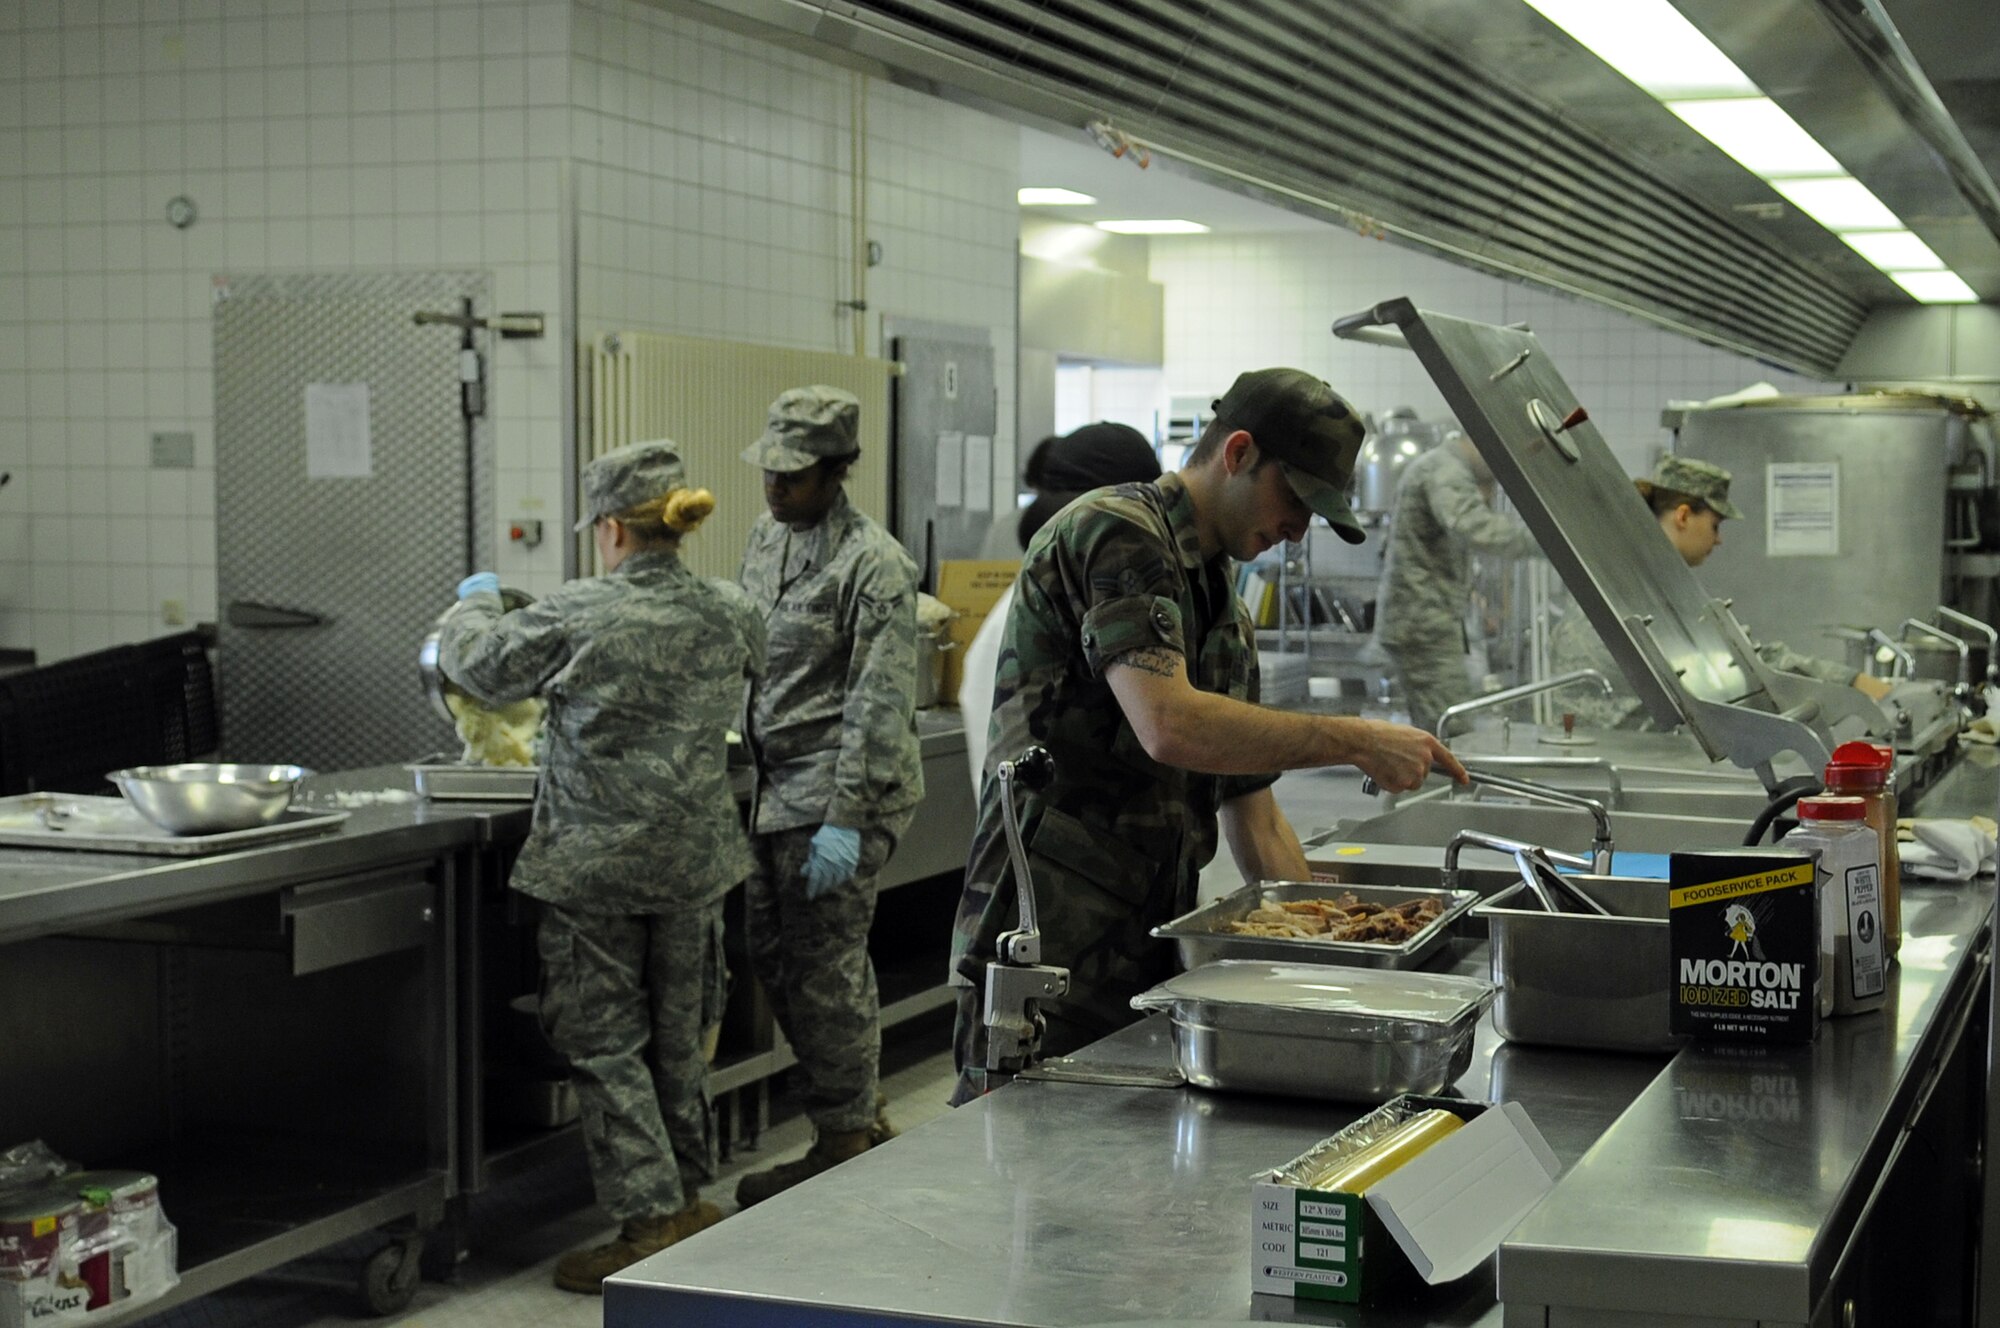 Airmen from the 435th Services Squadron cook Thanksgiving meals for airmen and families in the Rheinland Inn Dining Facility, Ramstein Air Base, Germany, Nov. 27, 2008. Over 500 people were served at the dining facility during the Thanksgiving feast. (U.S. Air Force photo by Airman 1st Class Grovert Fuentes-Contreras)